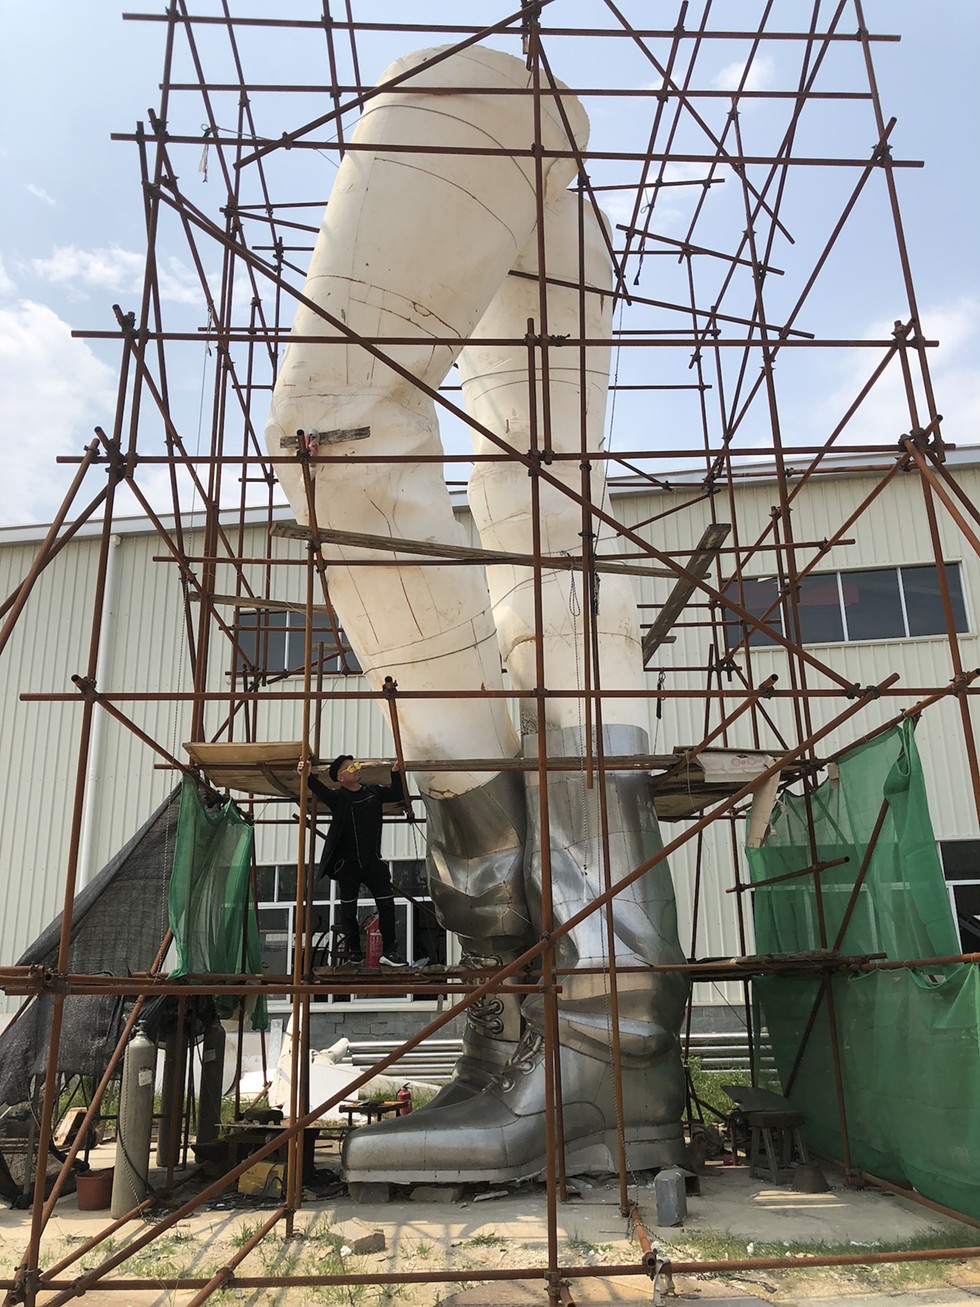 THROUGH JAN. 3, 2021: ‘JEFRË: POINTS OF CONNECTION,’ ORLANDO MUSEUM OF ART - FLORIDA ARTIST JEFRË WORKING ON A 24-STORY-HIGH STANDING FIGURE. WHEN COMPLETED, IT WILL BE ONE OF THE WORLD’S TALLEST ARTWORKS. [PHOTO COURTESY ORLANDO MUSEUM OF ART]